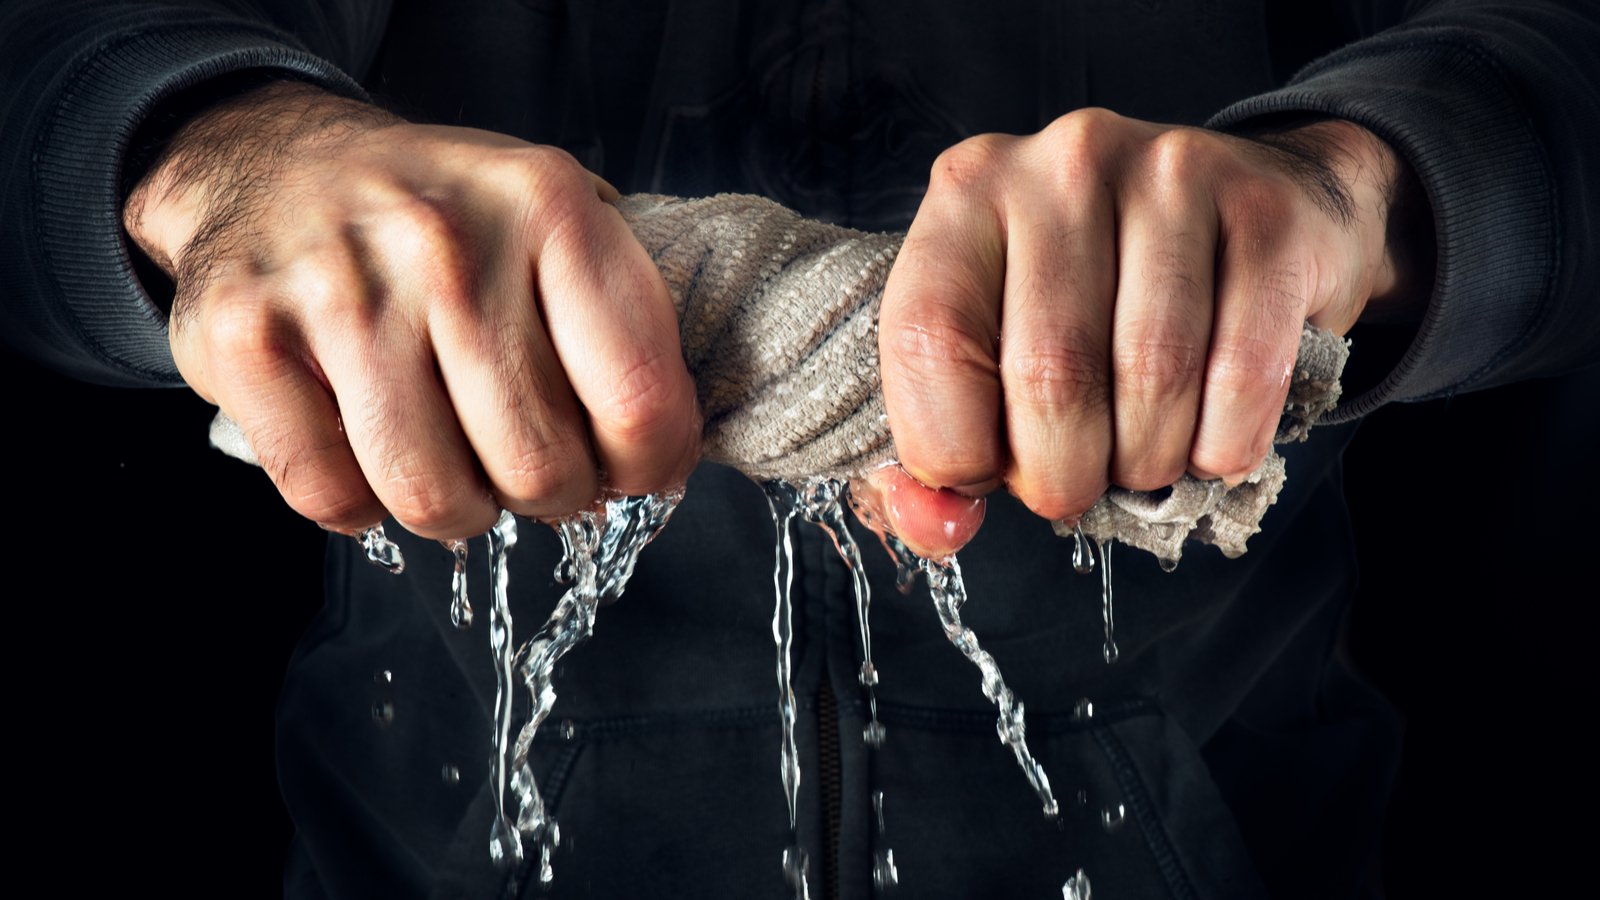 Man squeezing water out of a rag representing KPRX stock and short squeeze stocks.